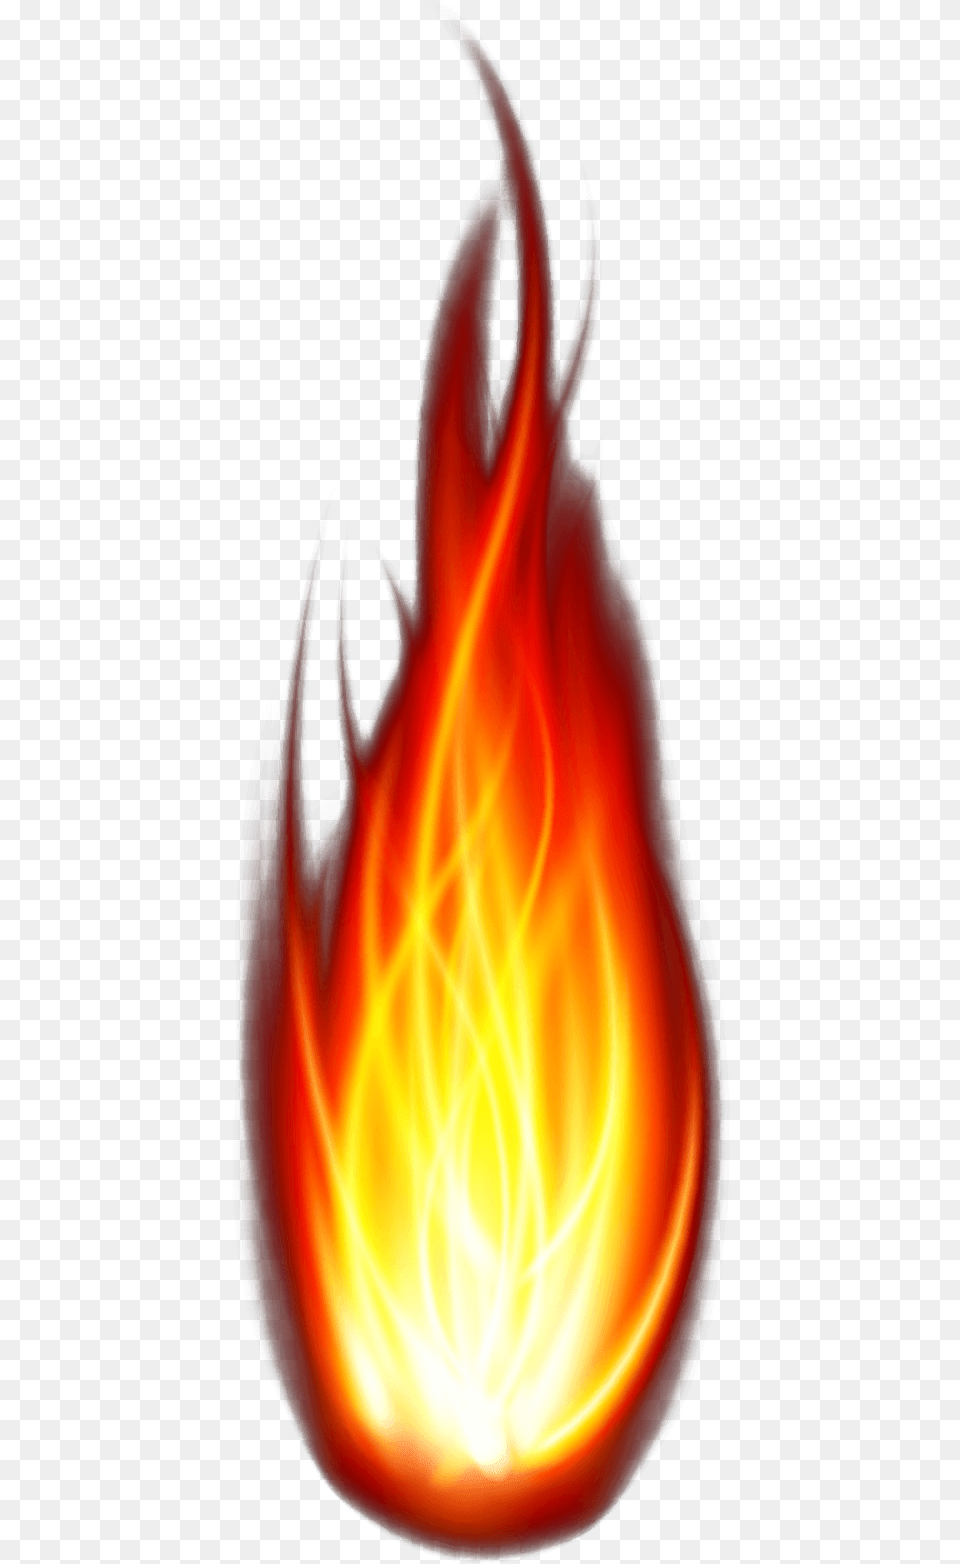 Fire Flame Image Download Searchpng Fire Cracker Fire, Bonfire Free Png